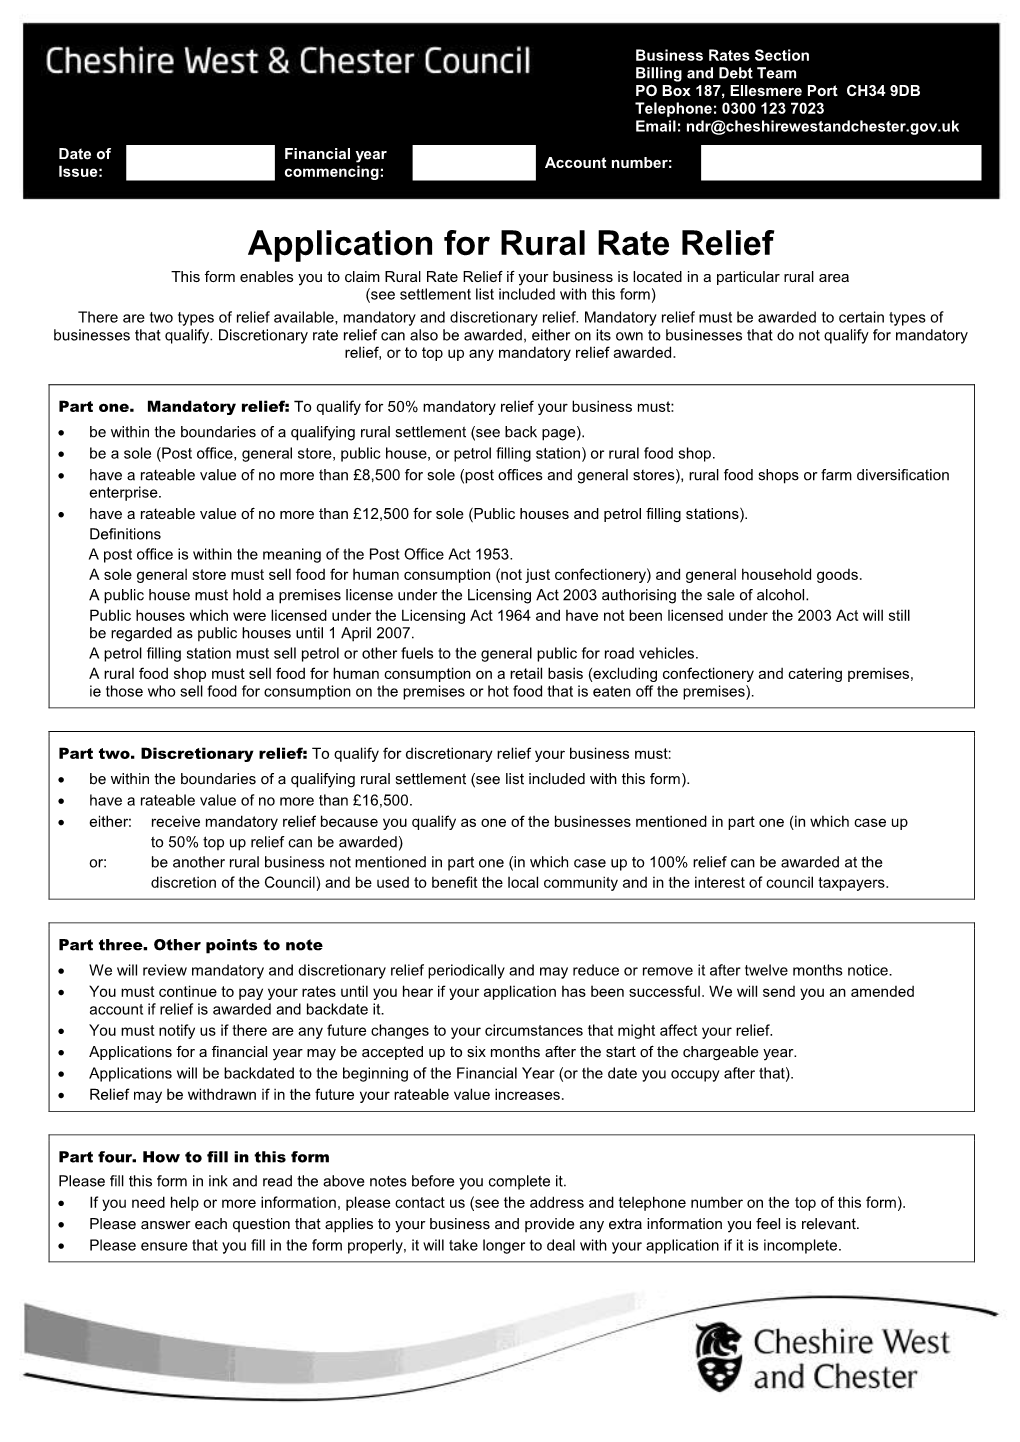 Rural Rate Relief Application Form